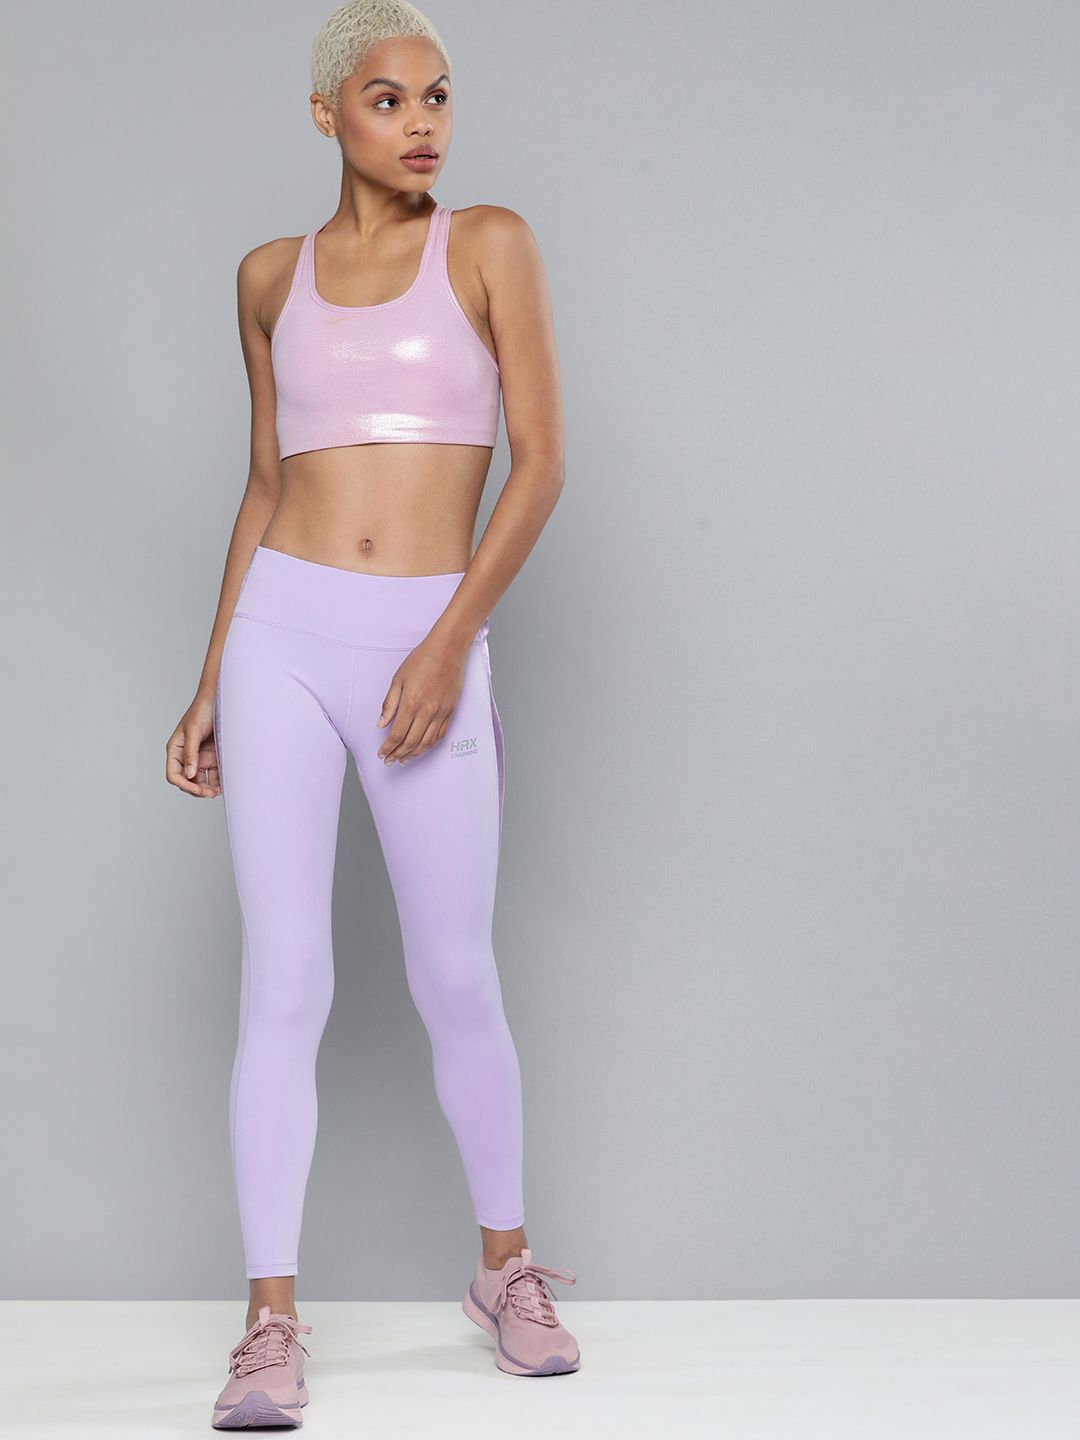 HRX By Hrithik Roshan Training Women Digital Lavendor Rapid-Dry Brand Carrier Tights Price in India